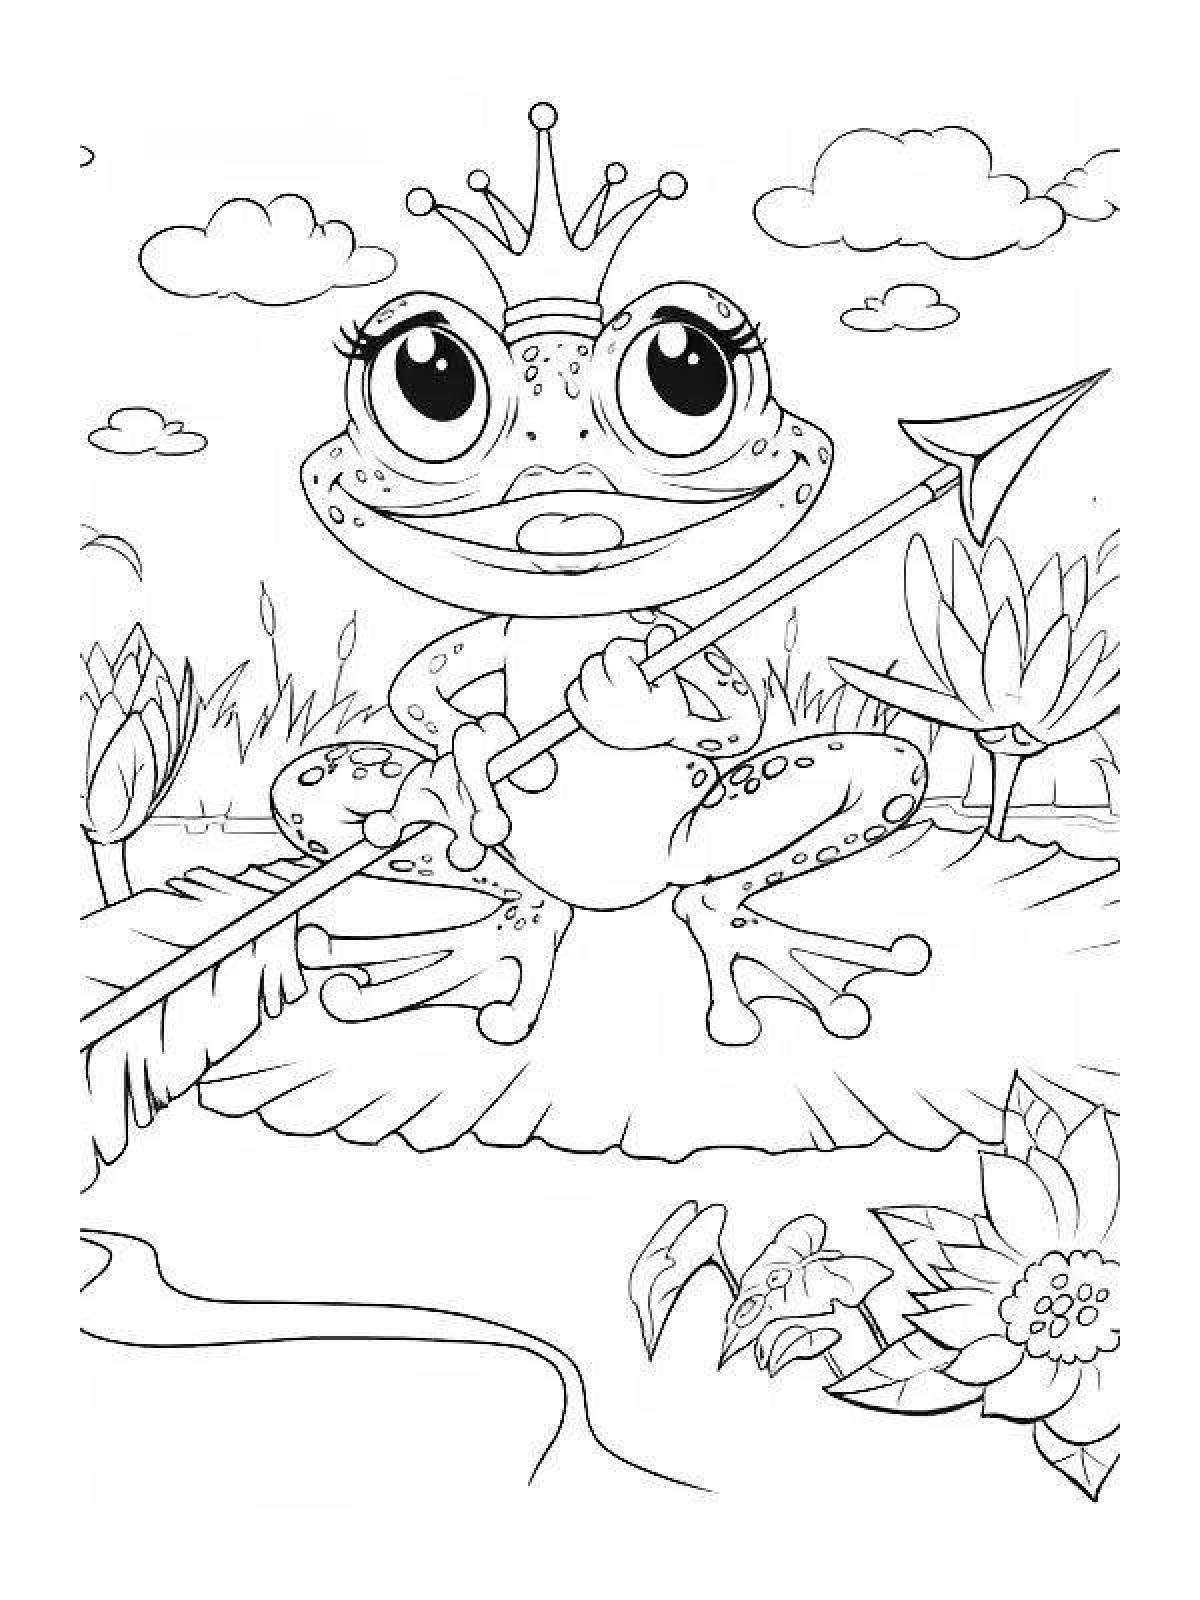 Colorful frog princess coloring page for kids